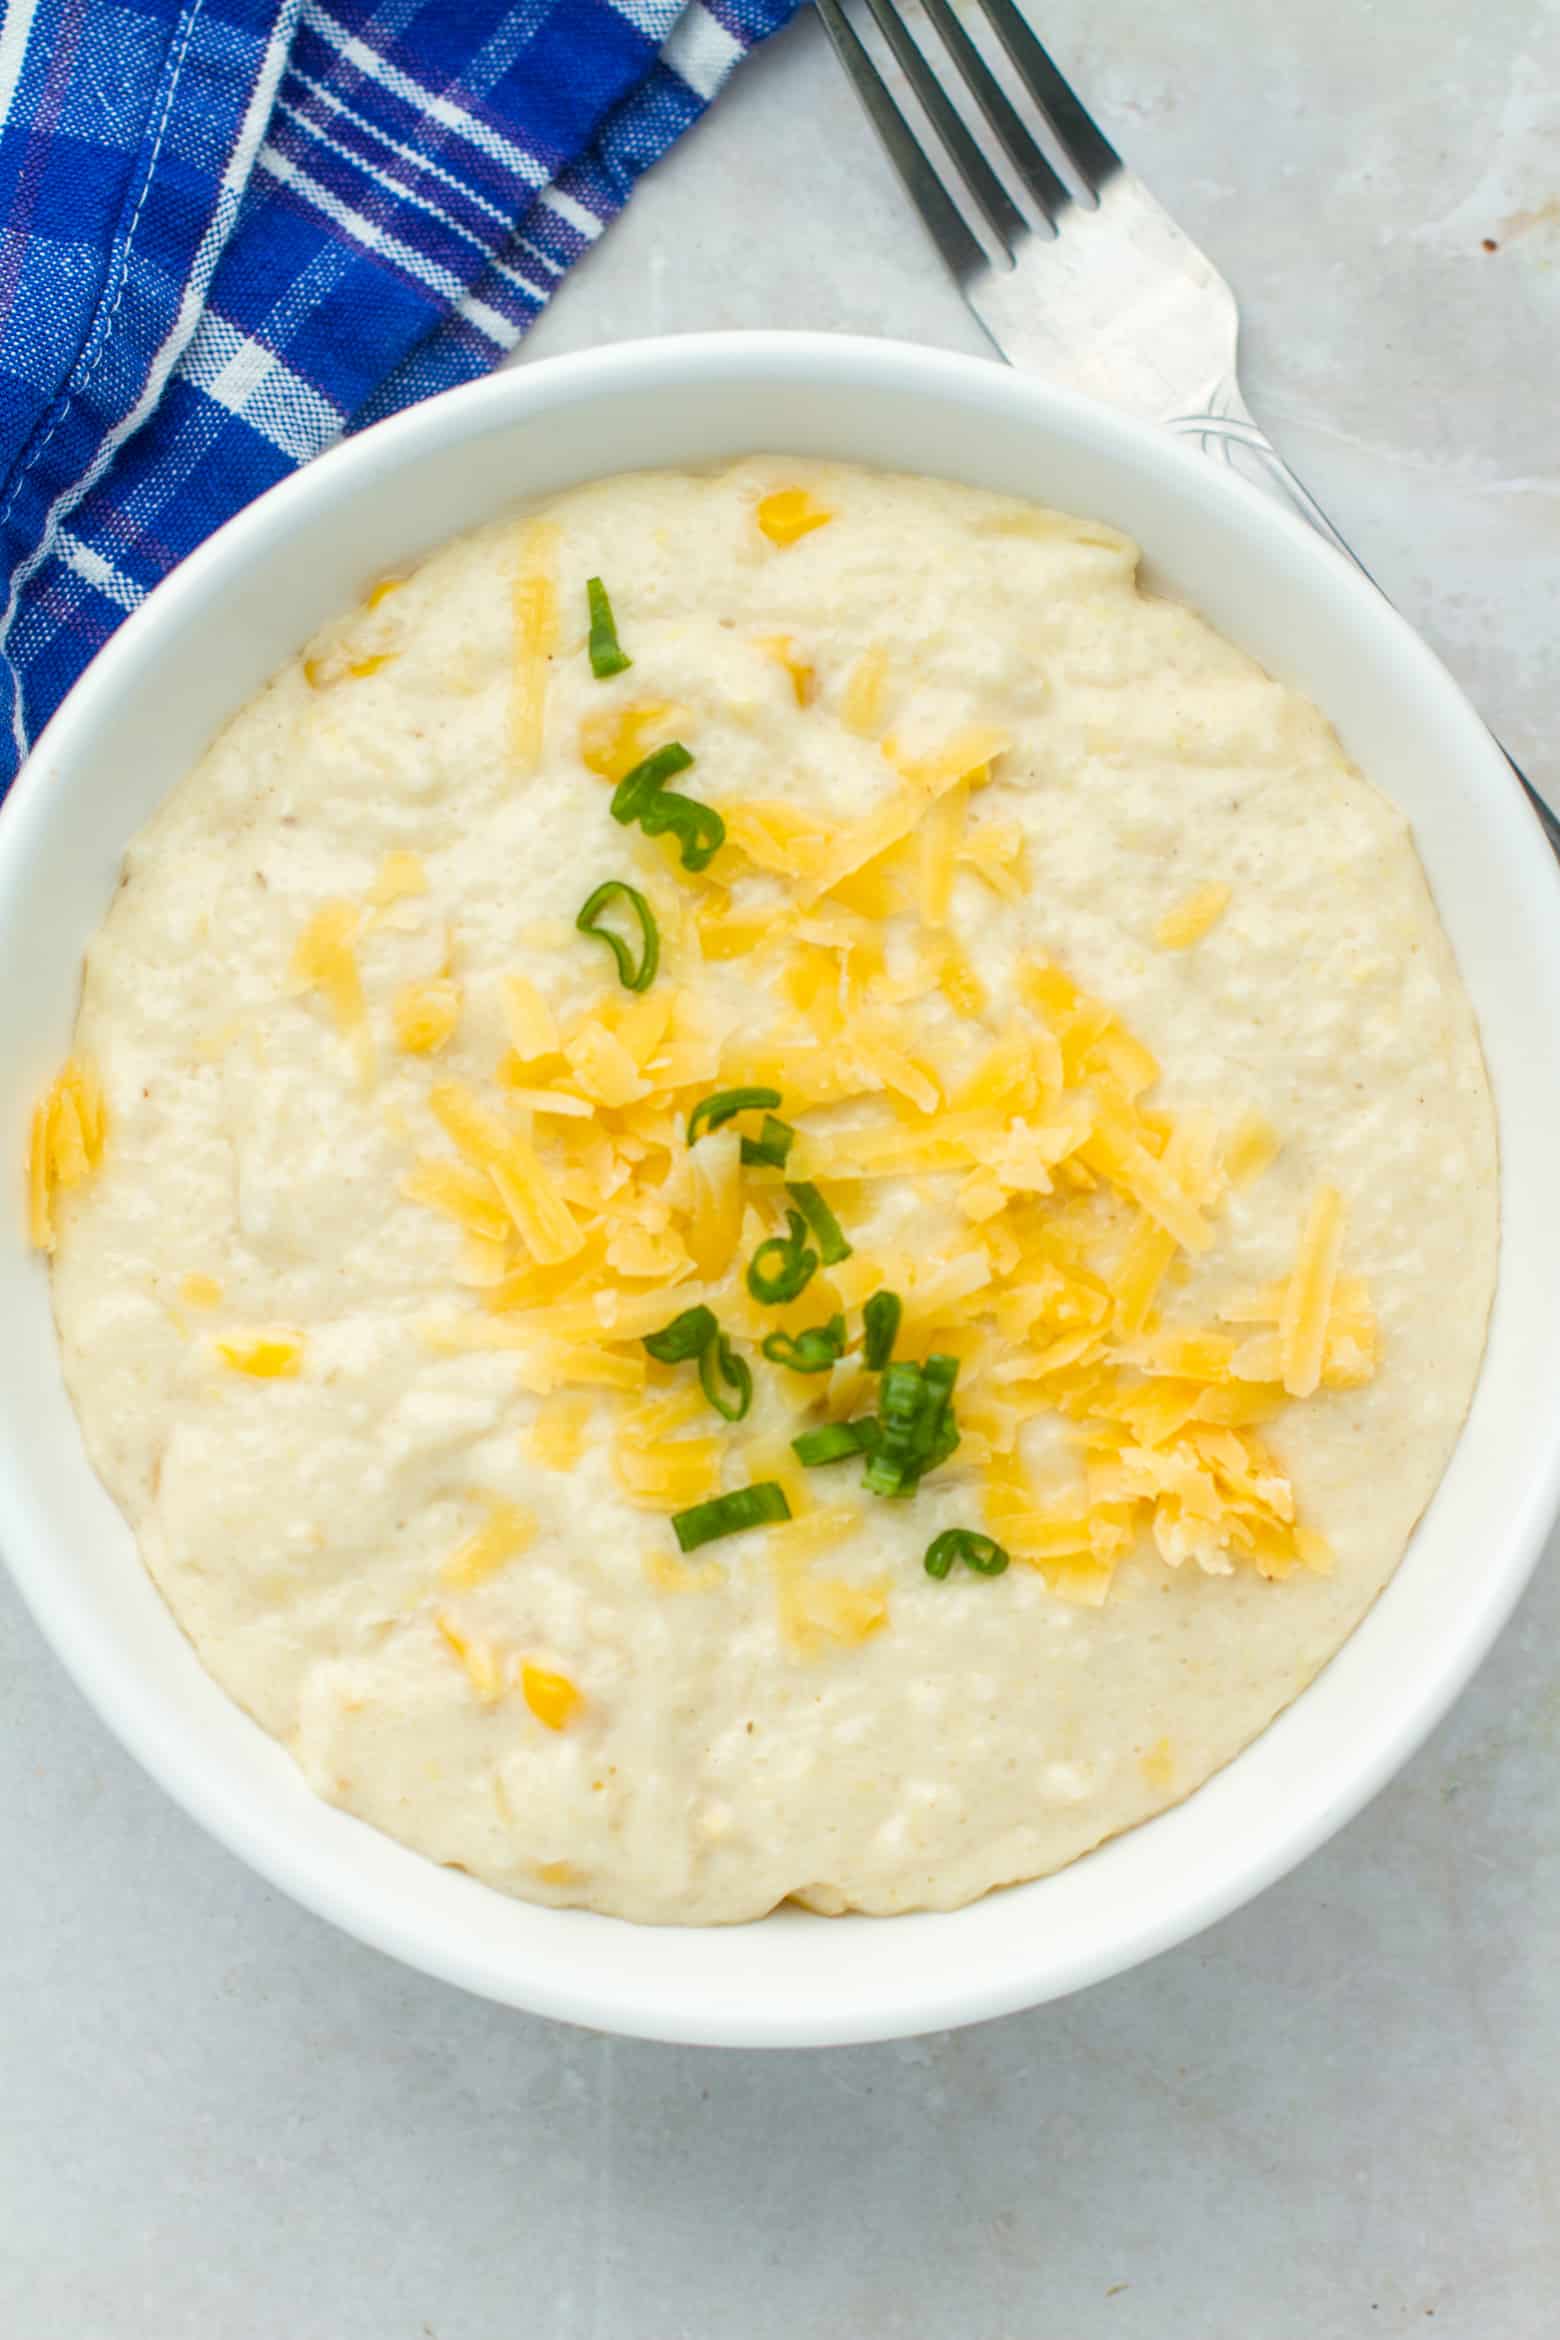 Smoked Gouda Grits in a bowl.